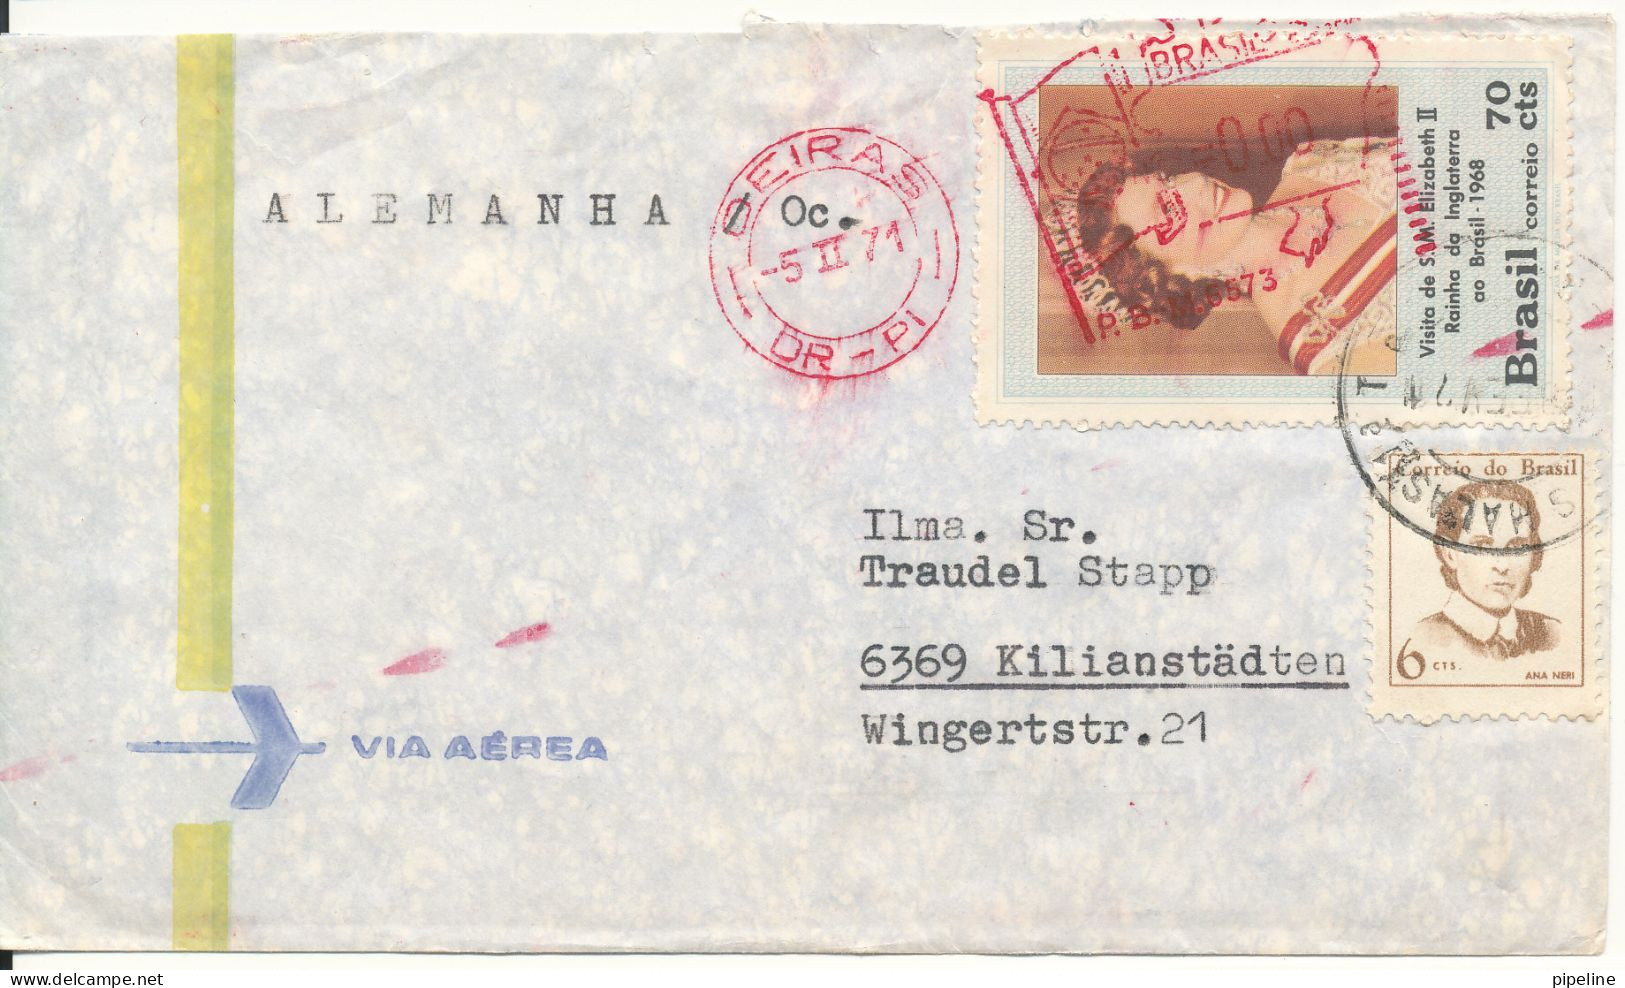 Brazil Air Mail Cover Sent To Germany Oeiras 5-11-1971 Queen Elizabeth II Visit To Brazil - Airmail